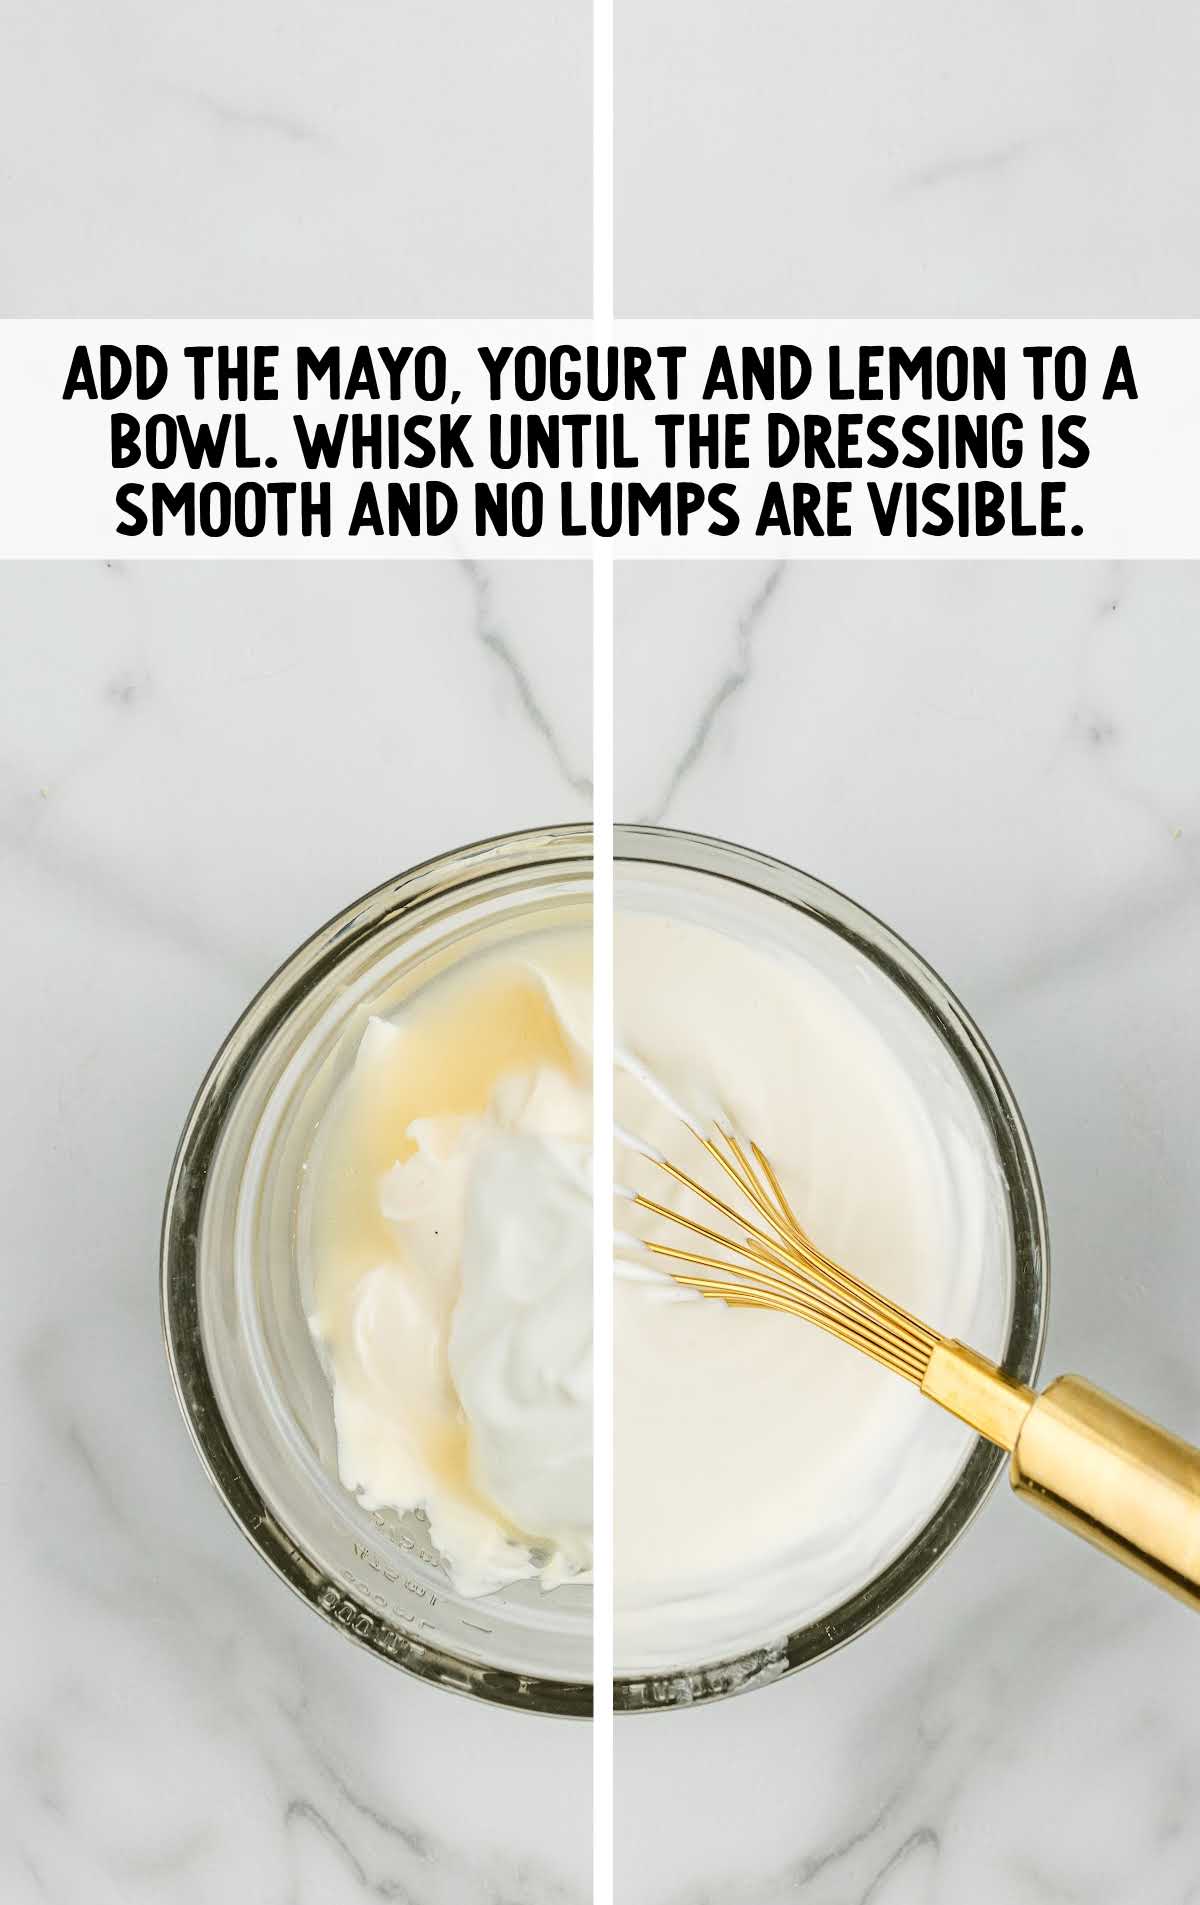 mayonnaise, yogurt and lemon juice whisked together in a bowl